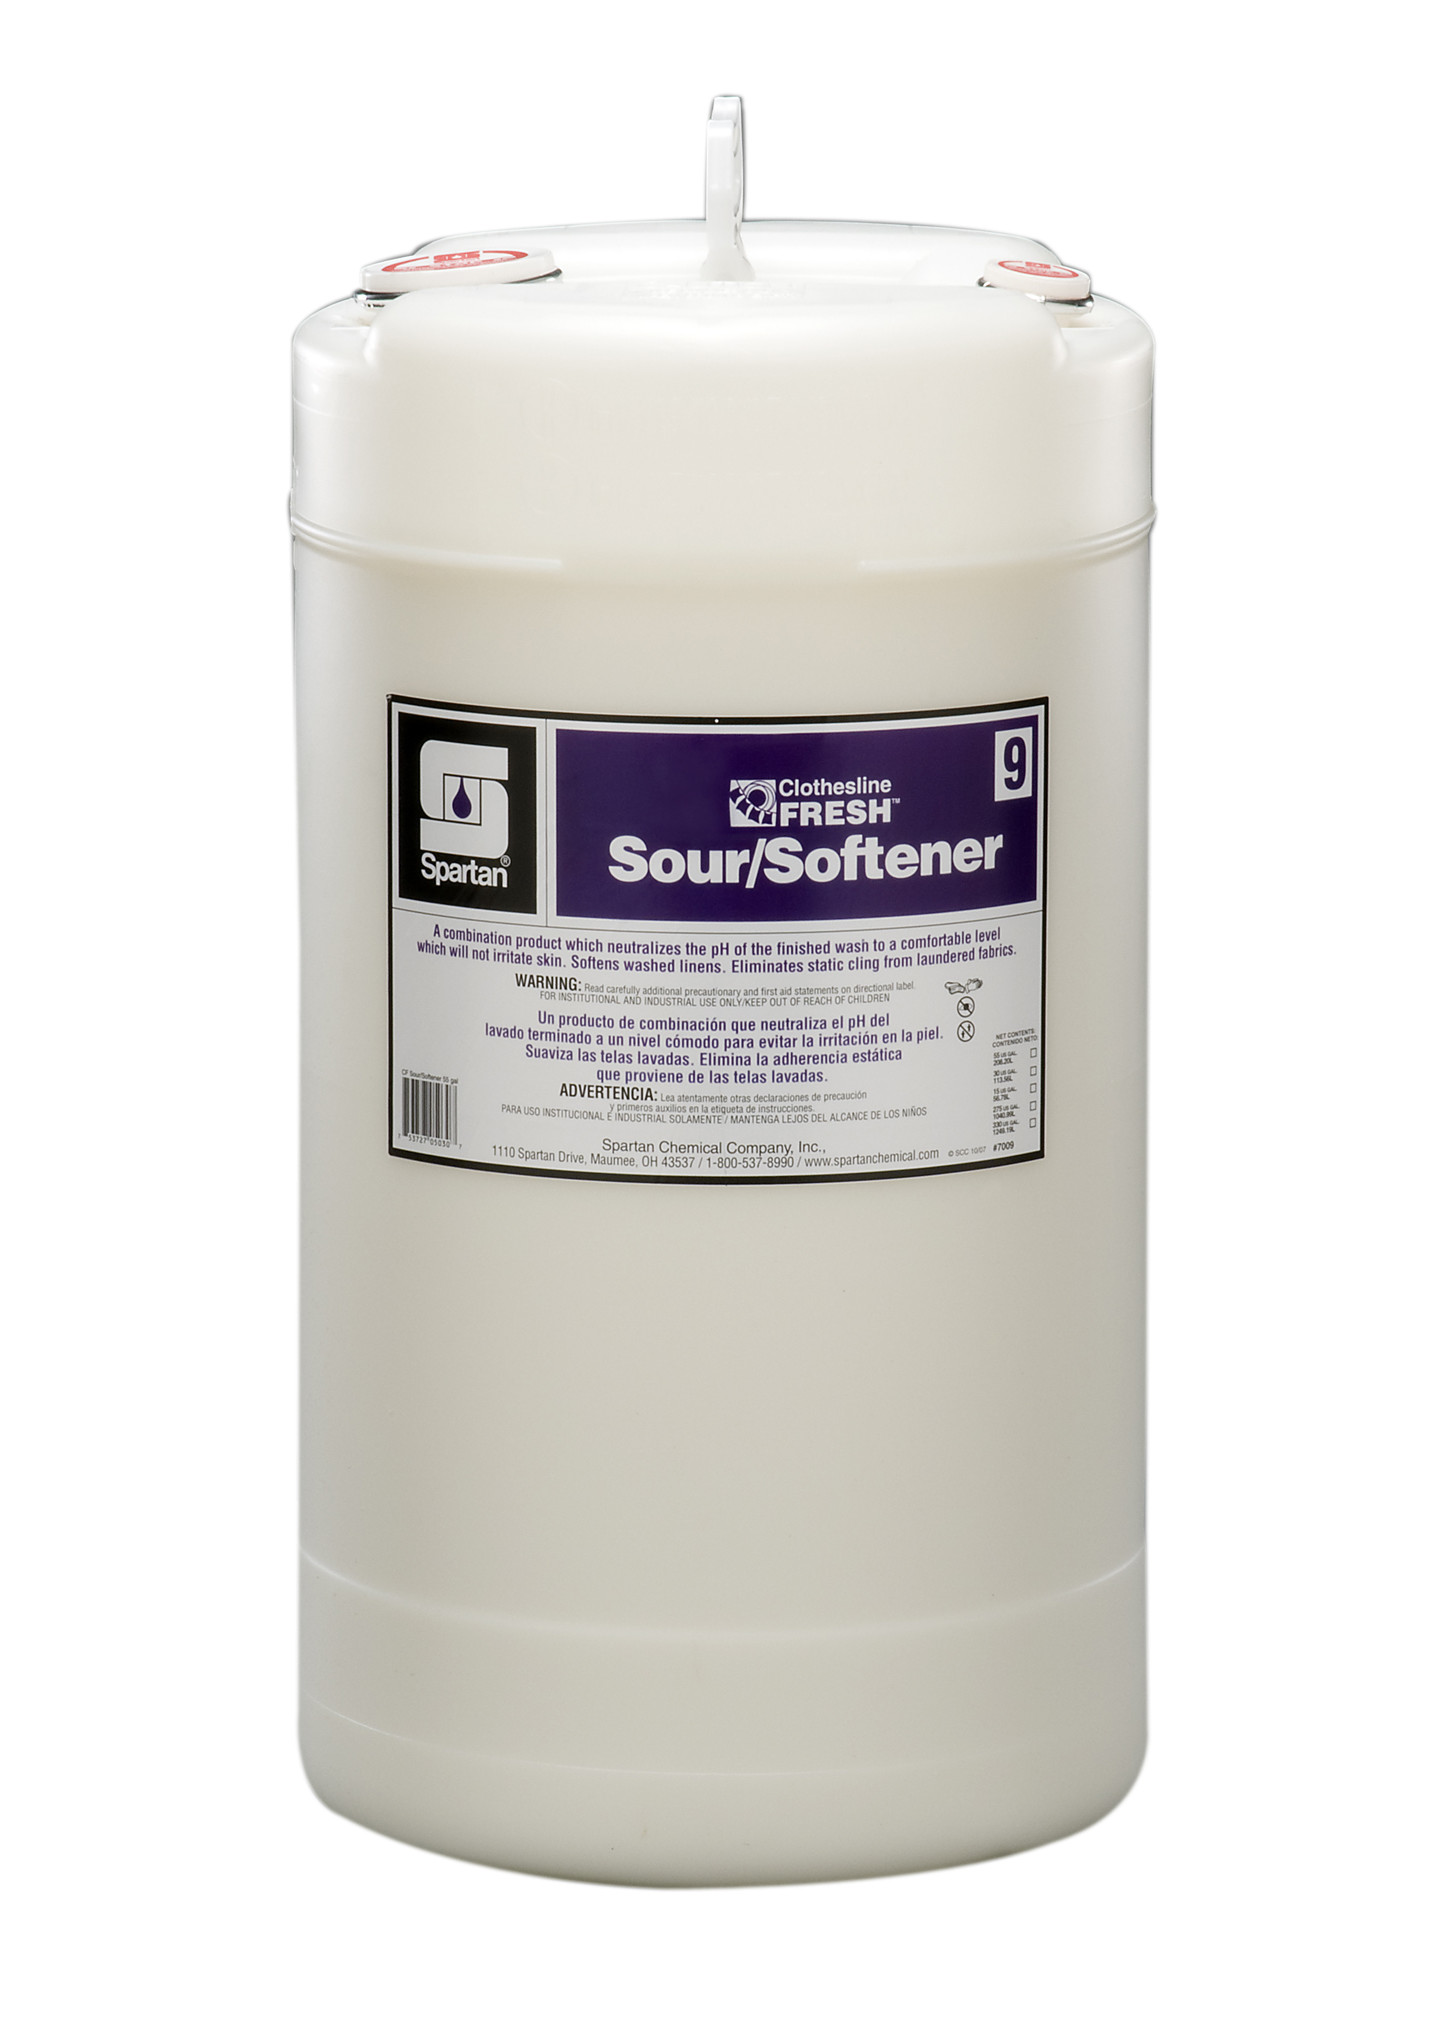 Spartan Chemical Company Clothesline Fresh Sour/Softener 9, 15 GAL DRUM